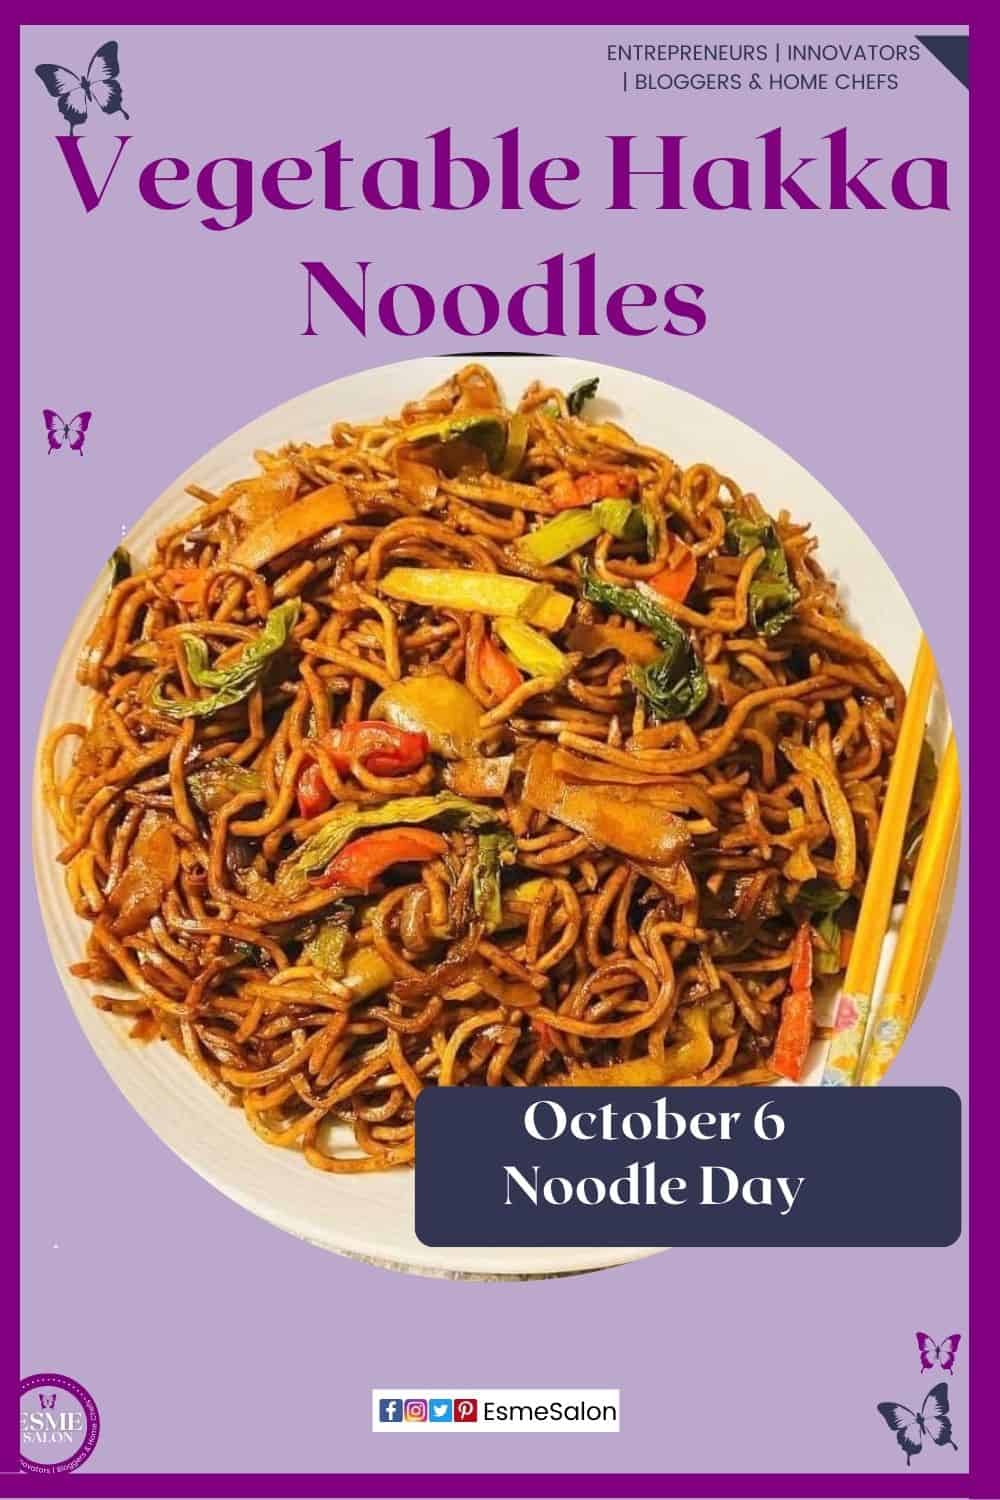 an image of a plate of Indian Style Vegetable Hakka Noodles with chopsticks